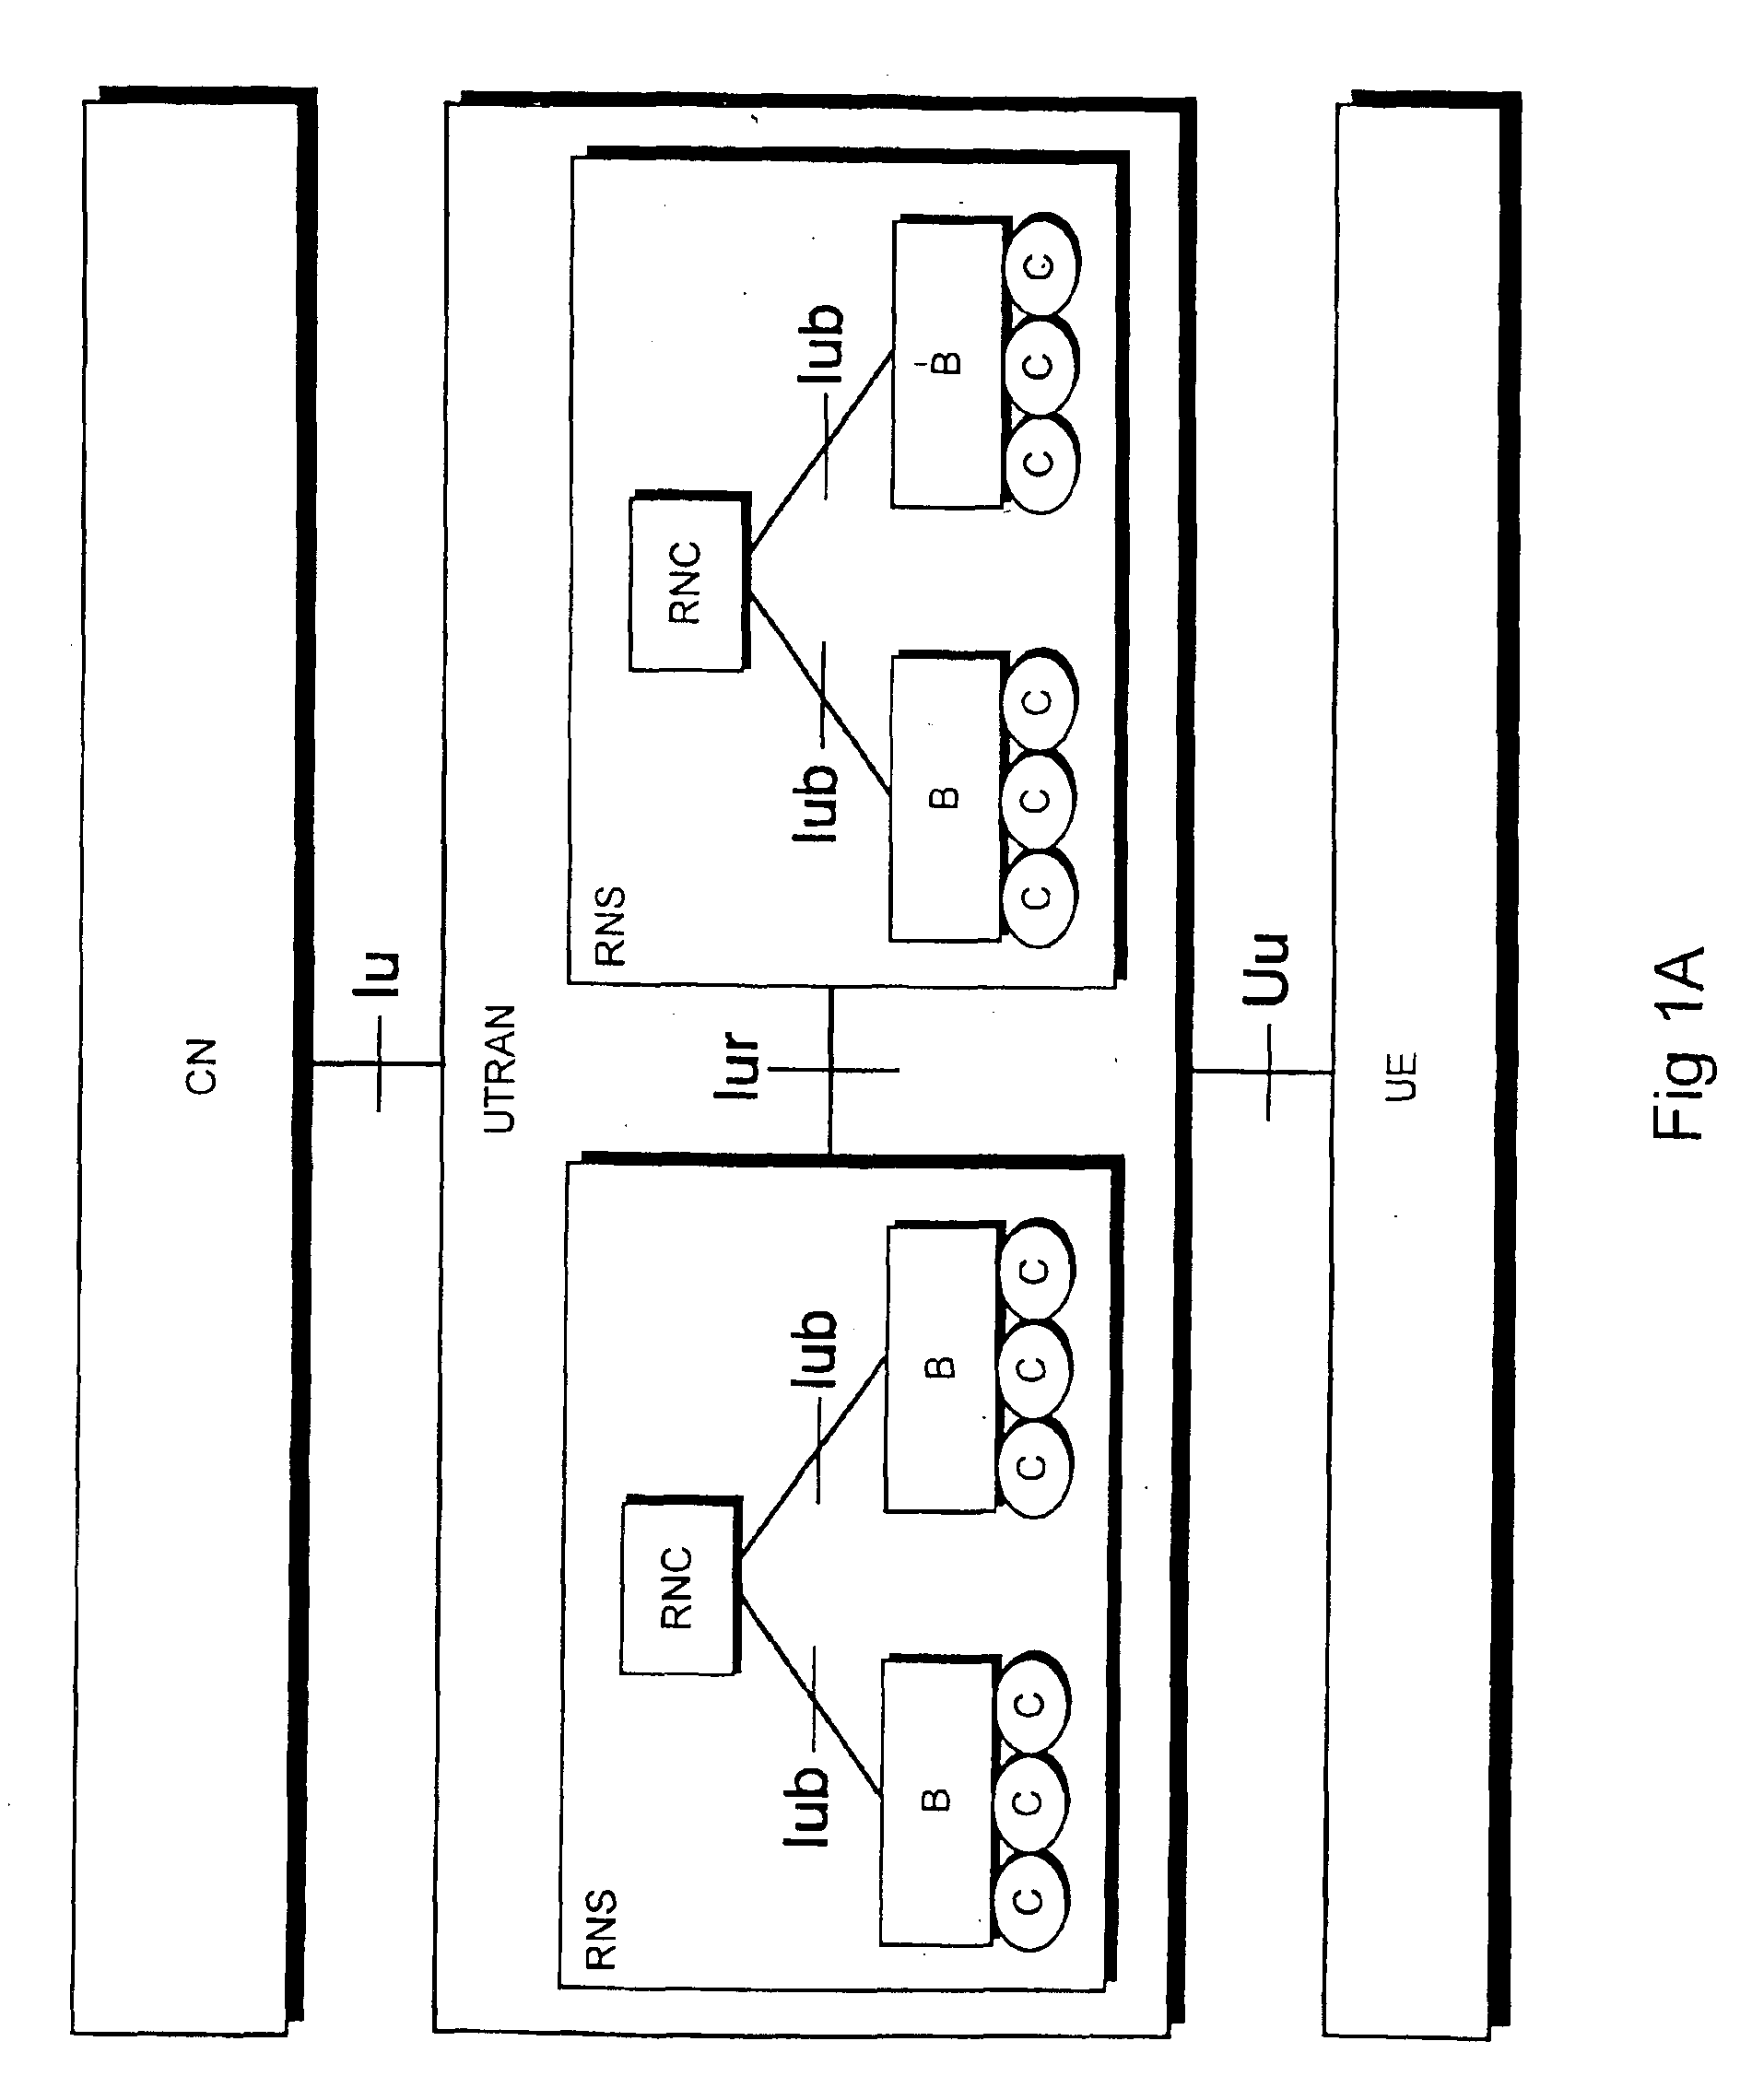 Method of ciphering data transmission in a radio system